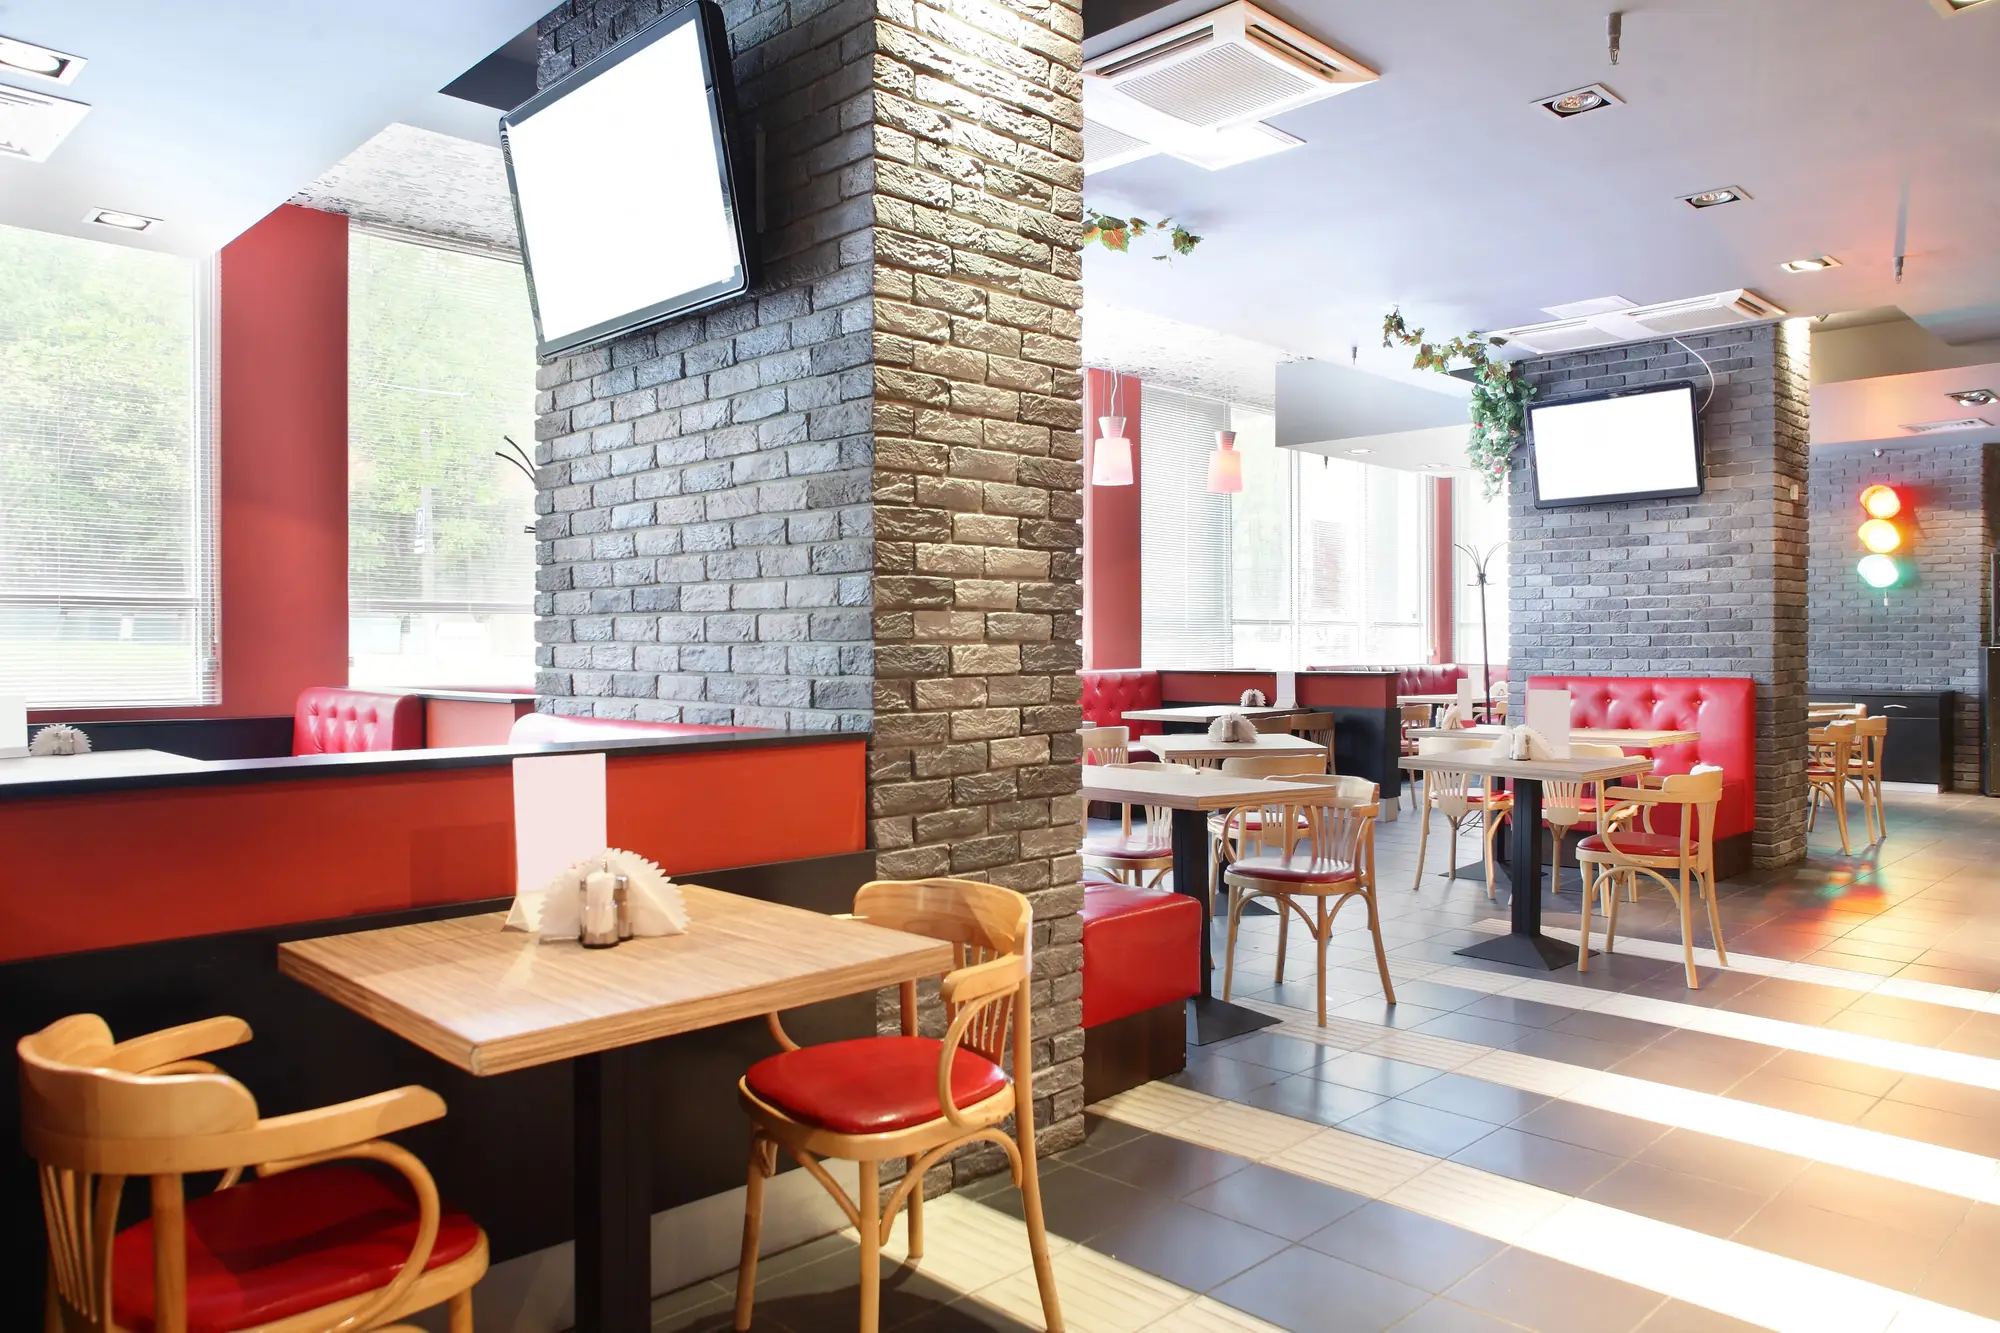 9 Creative Applications Of Digital Signage In The Restaurant Industry